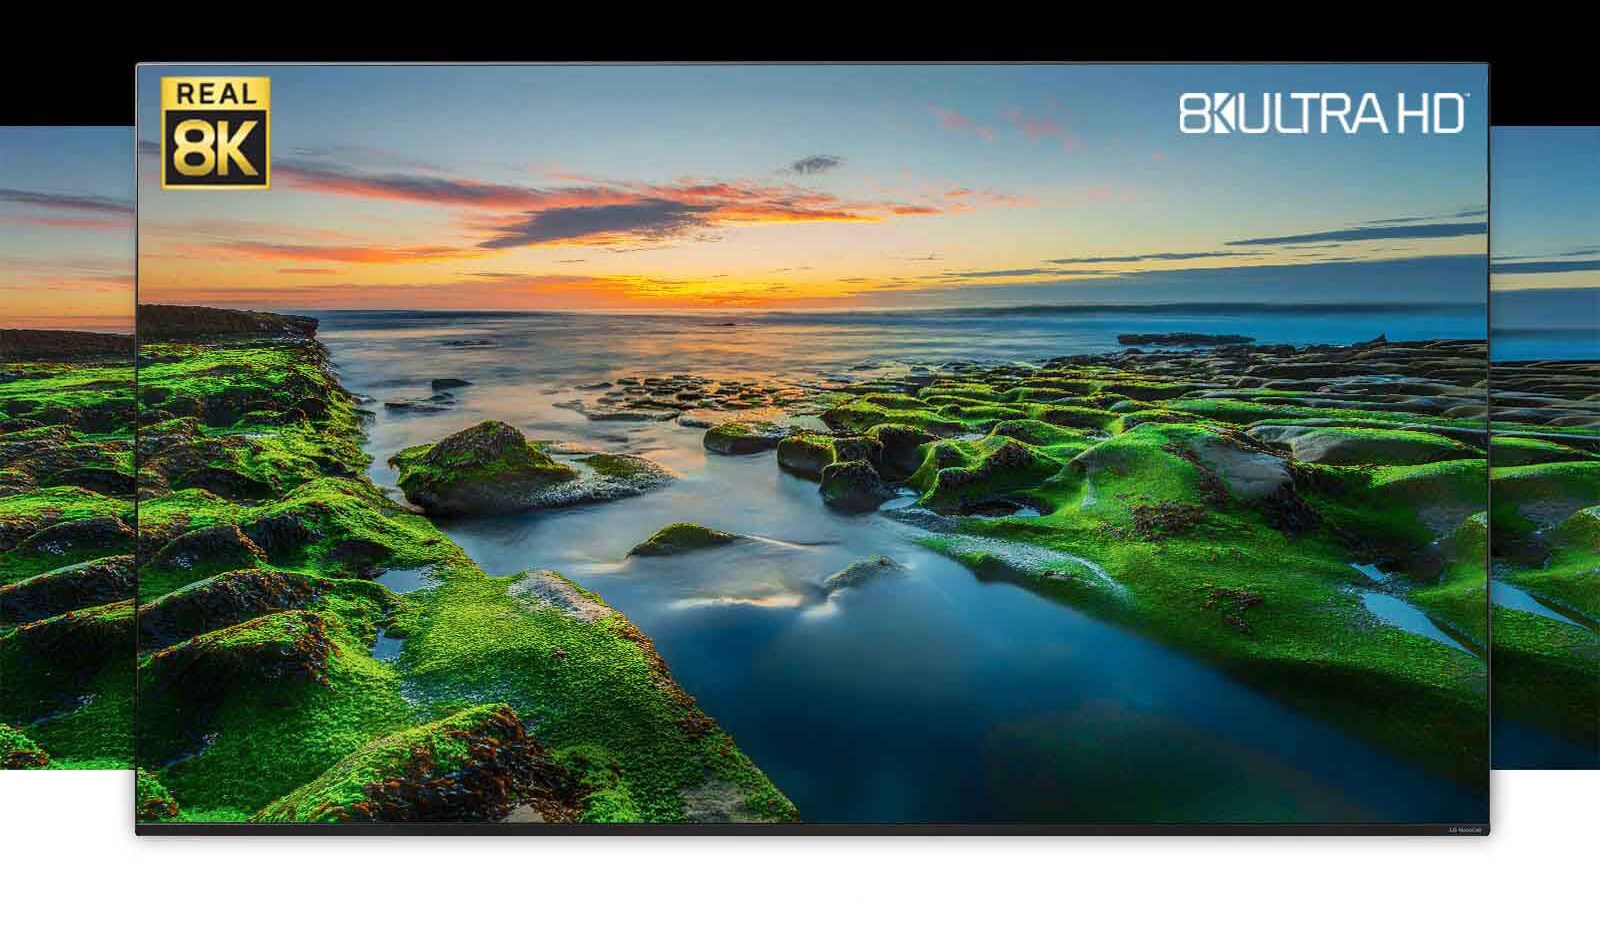 TV screen showing the wide view of nature with Real 8K and CTA logos